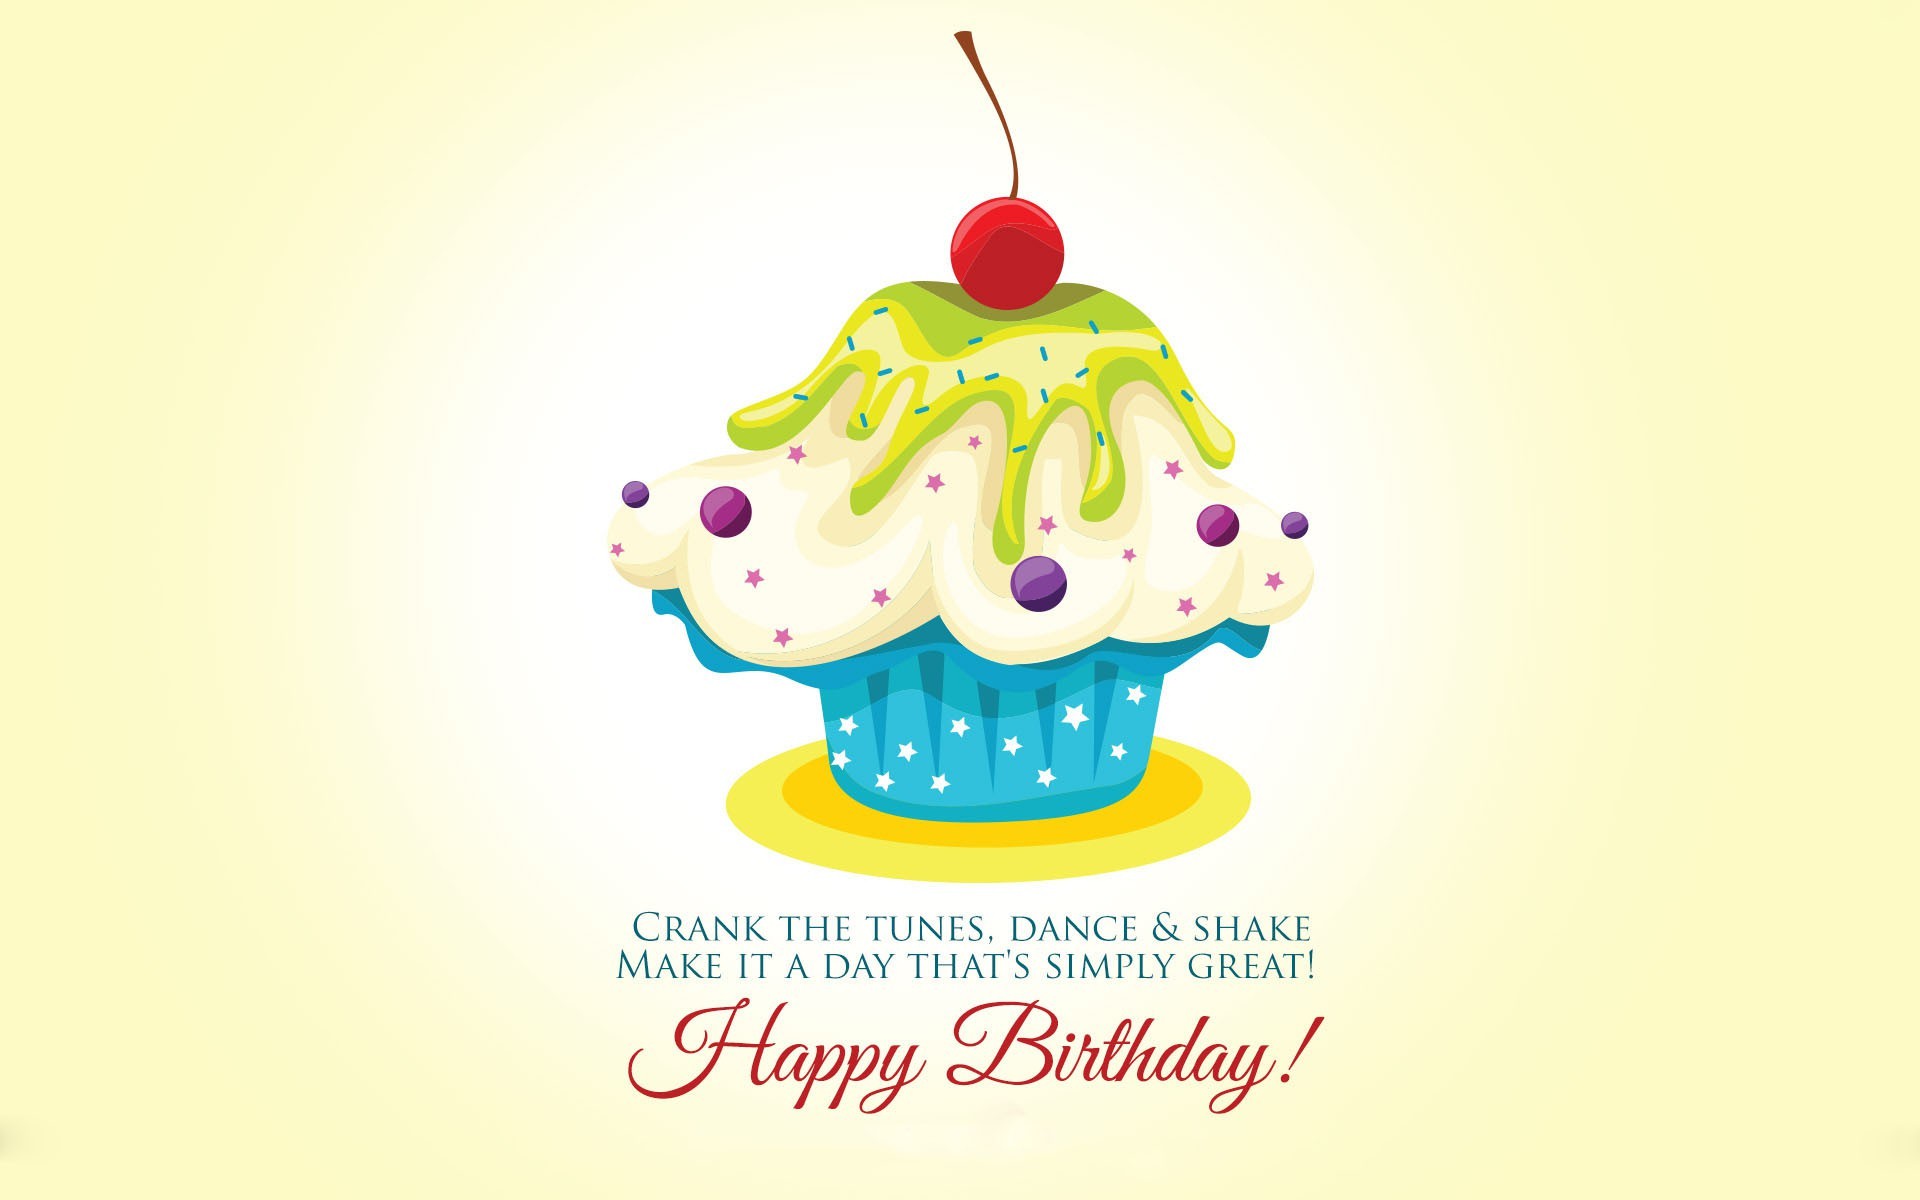 Happy Birthday Wishes Quote Hd Wallpaper Background - Birthday Greeting Background Hd - HD Wallpaper 